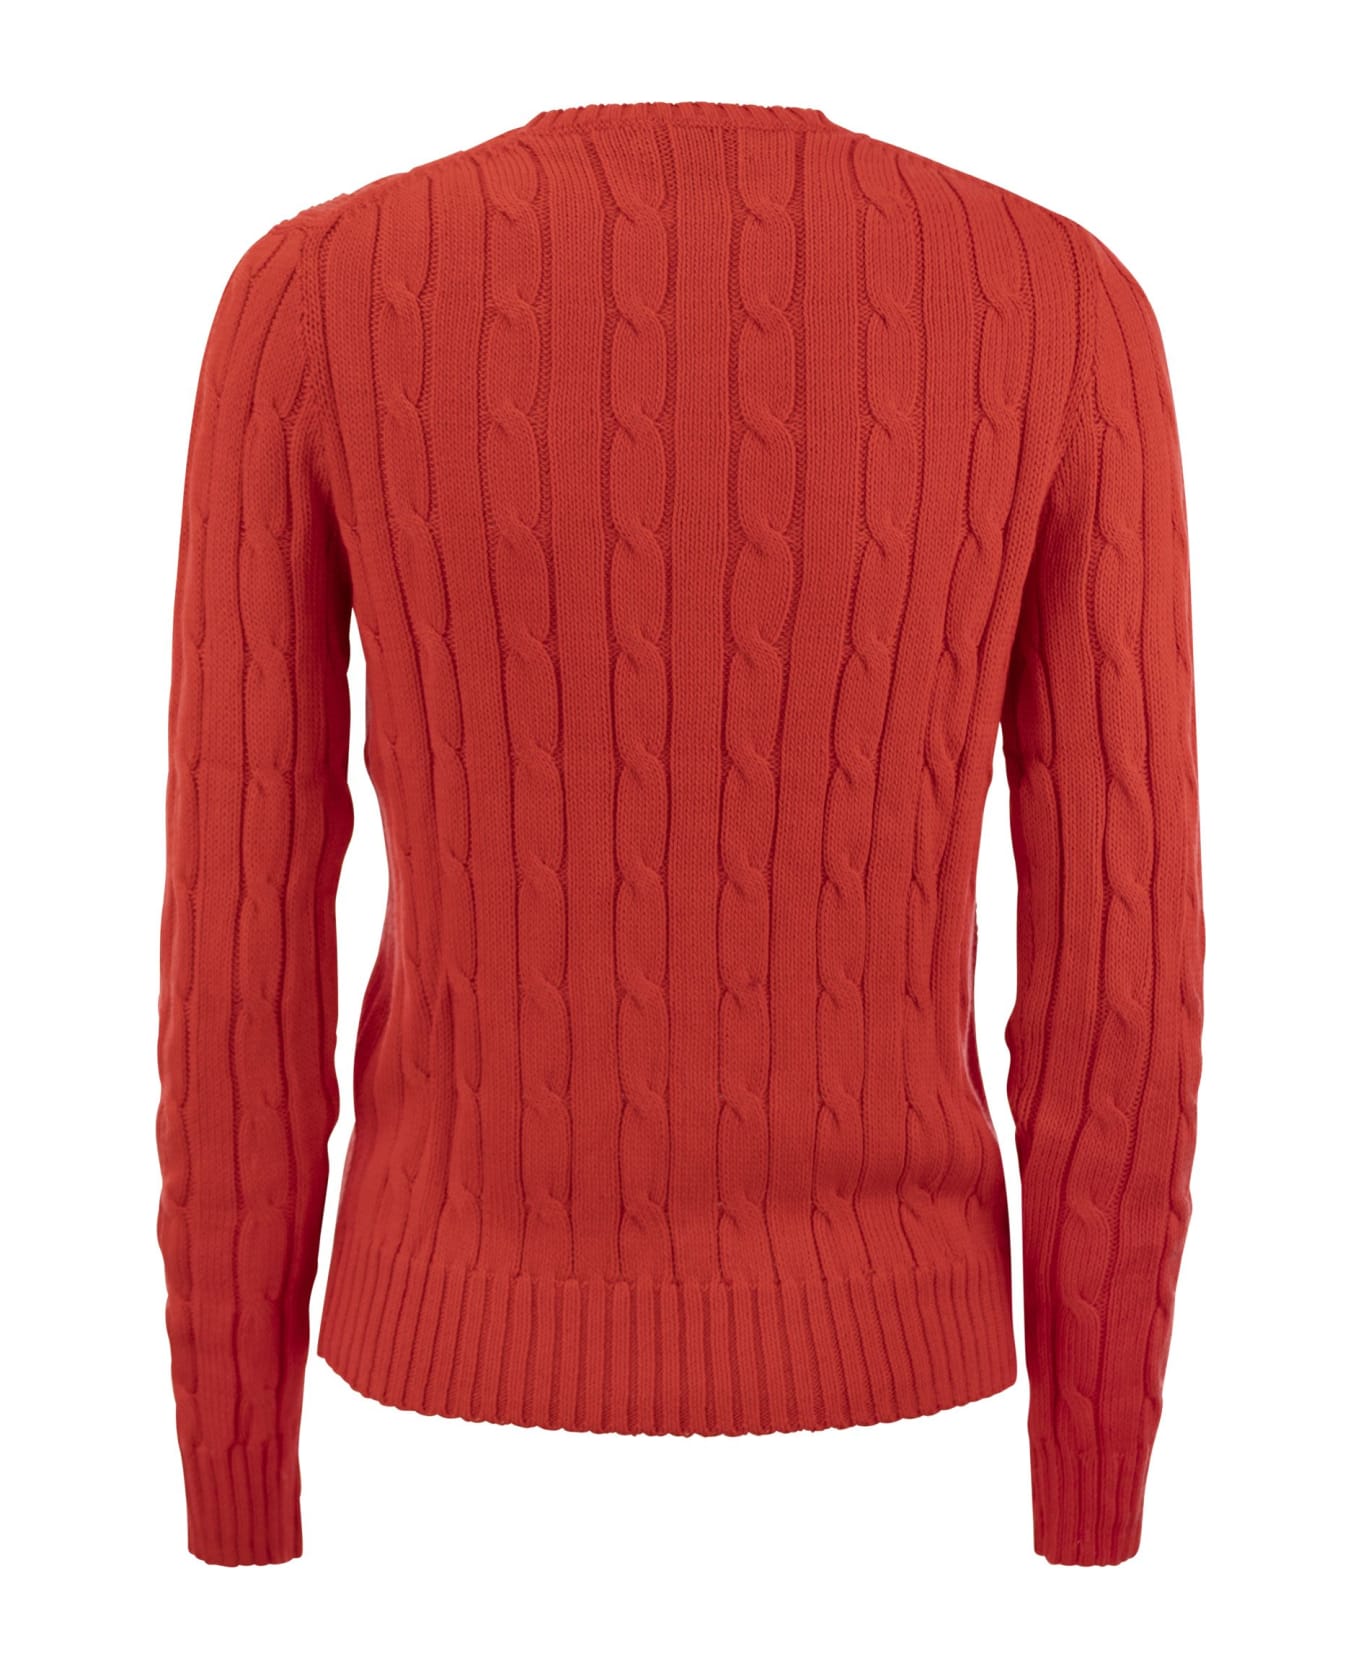 Polo Ralph Lauren Slim-fit Cable Knit Sweater - Red